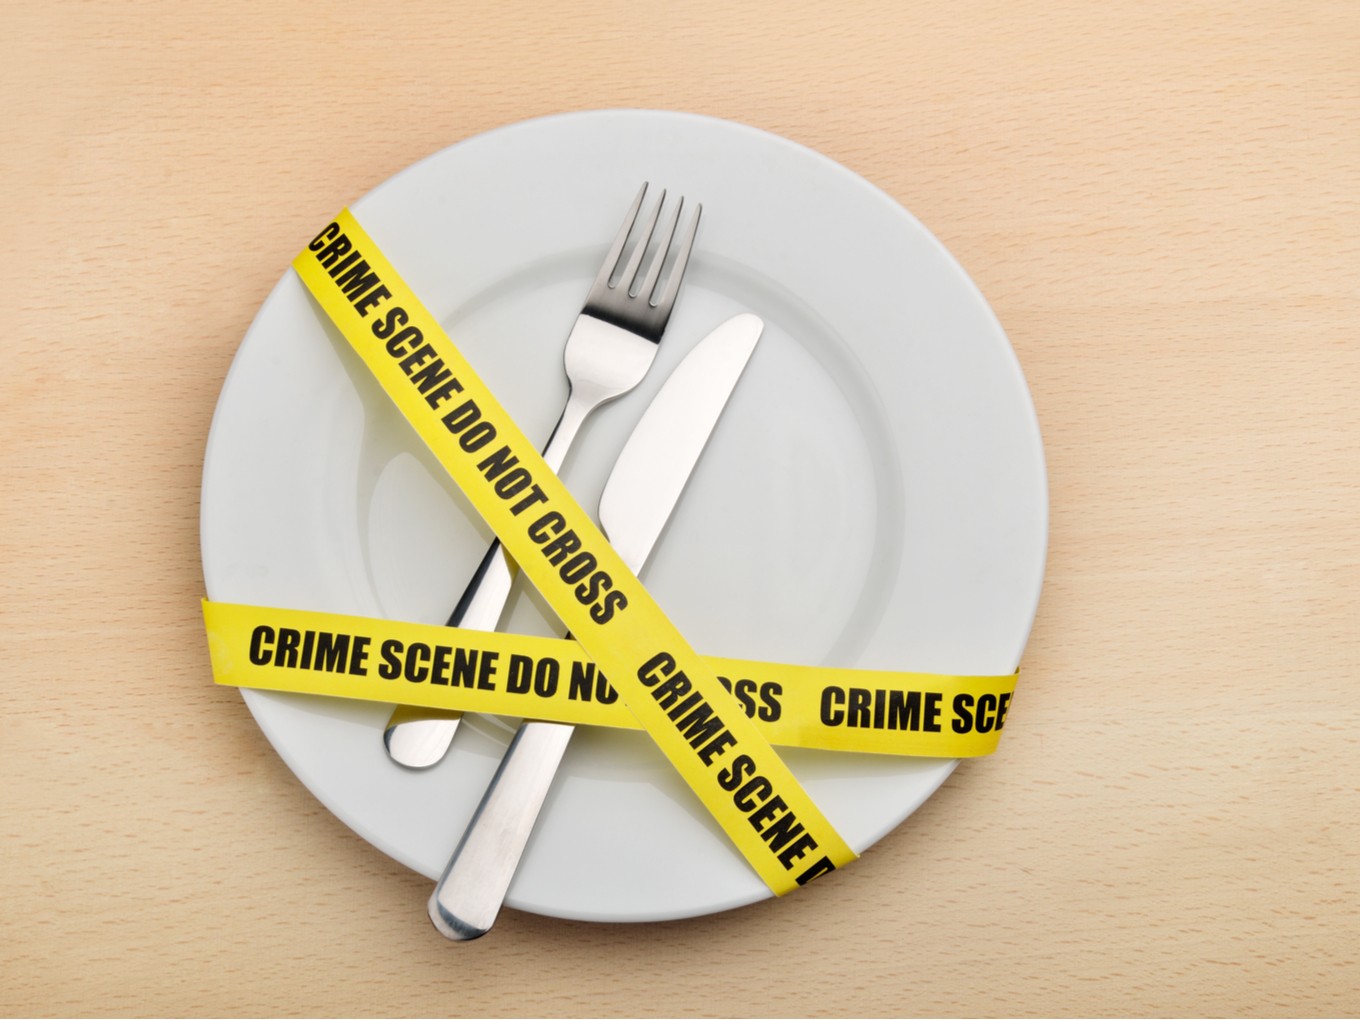 Food Delivery Executive Shoots Noida-Based Restaurant's Owner Dead; Probe Launched